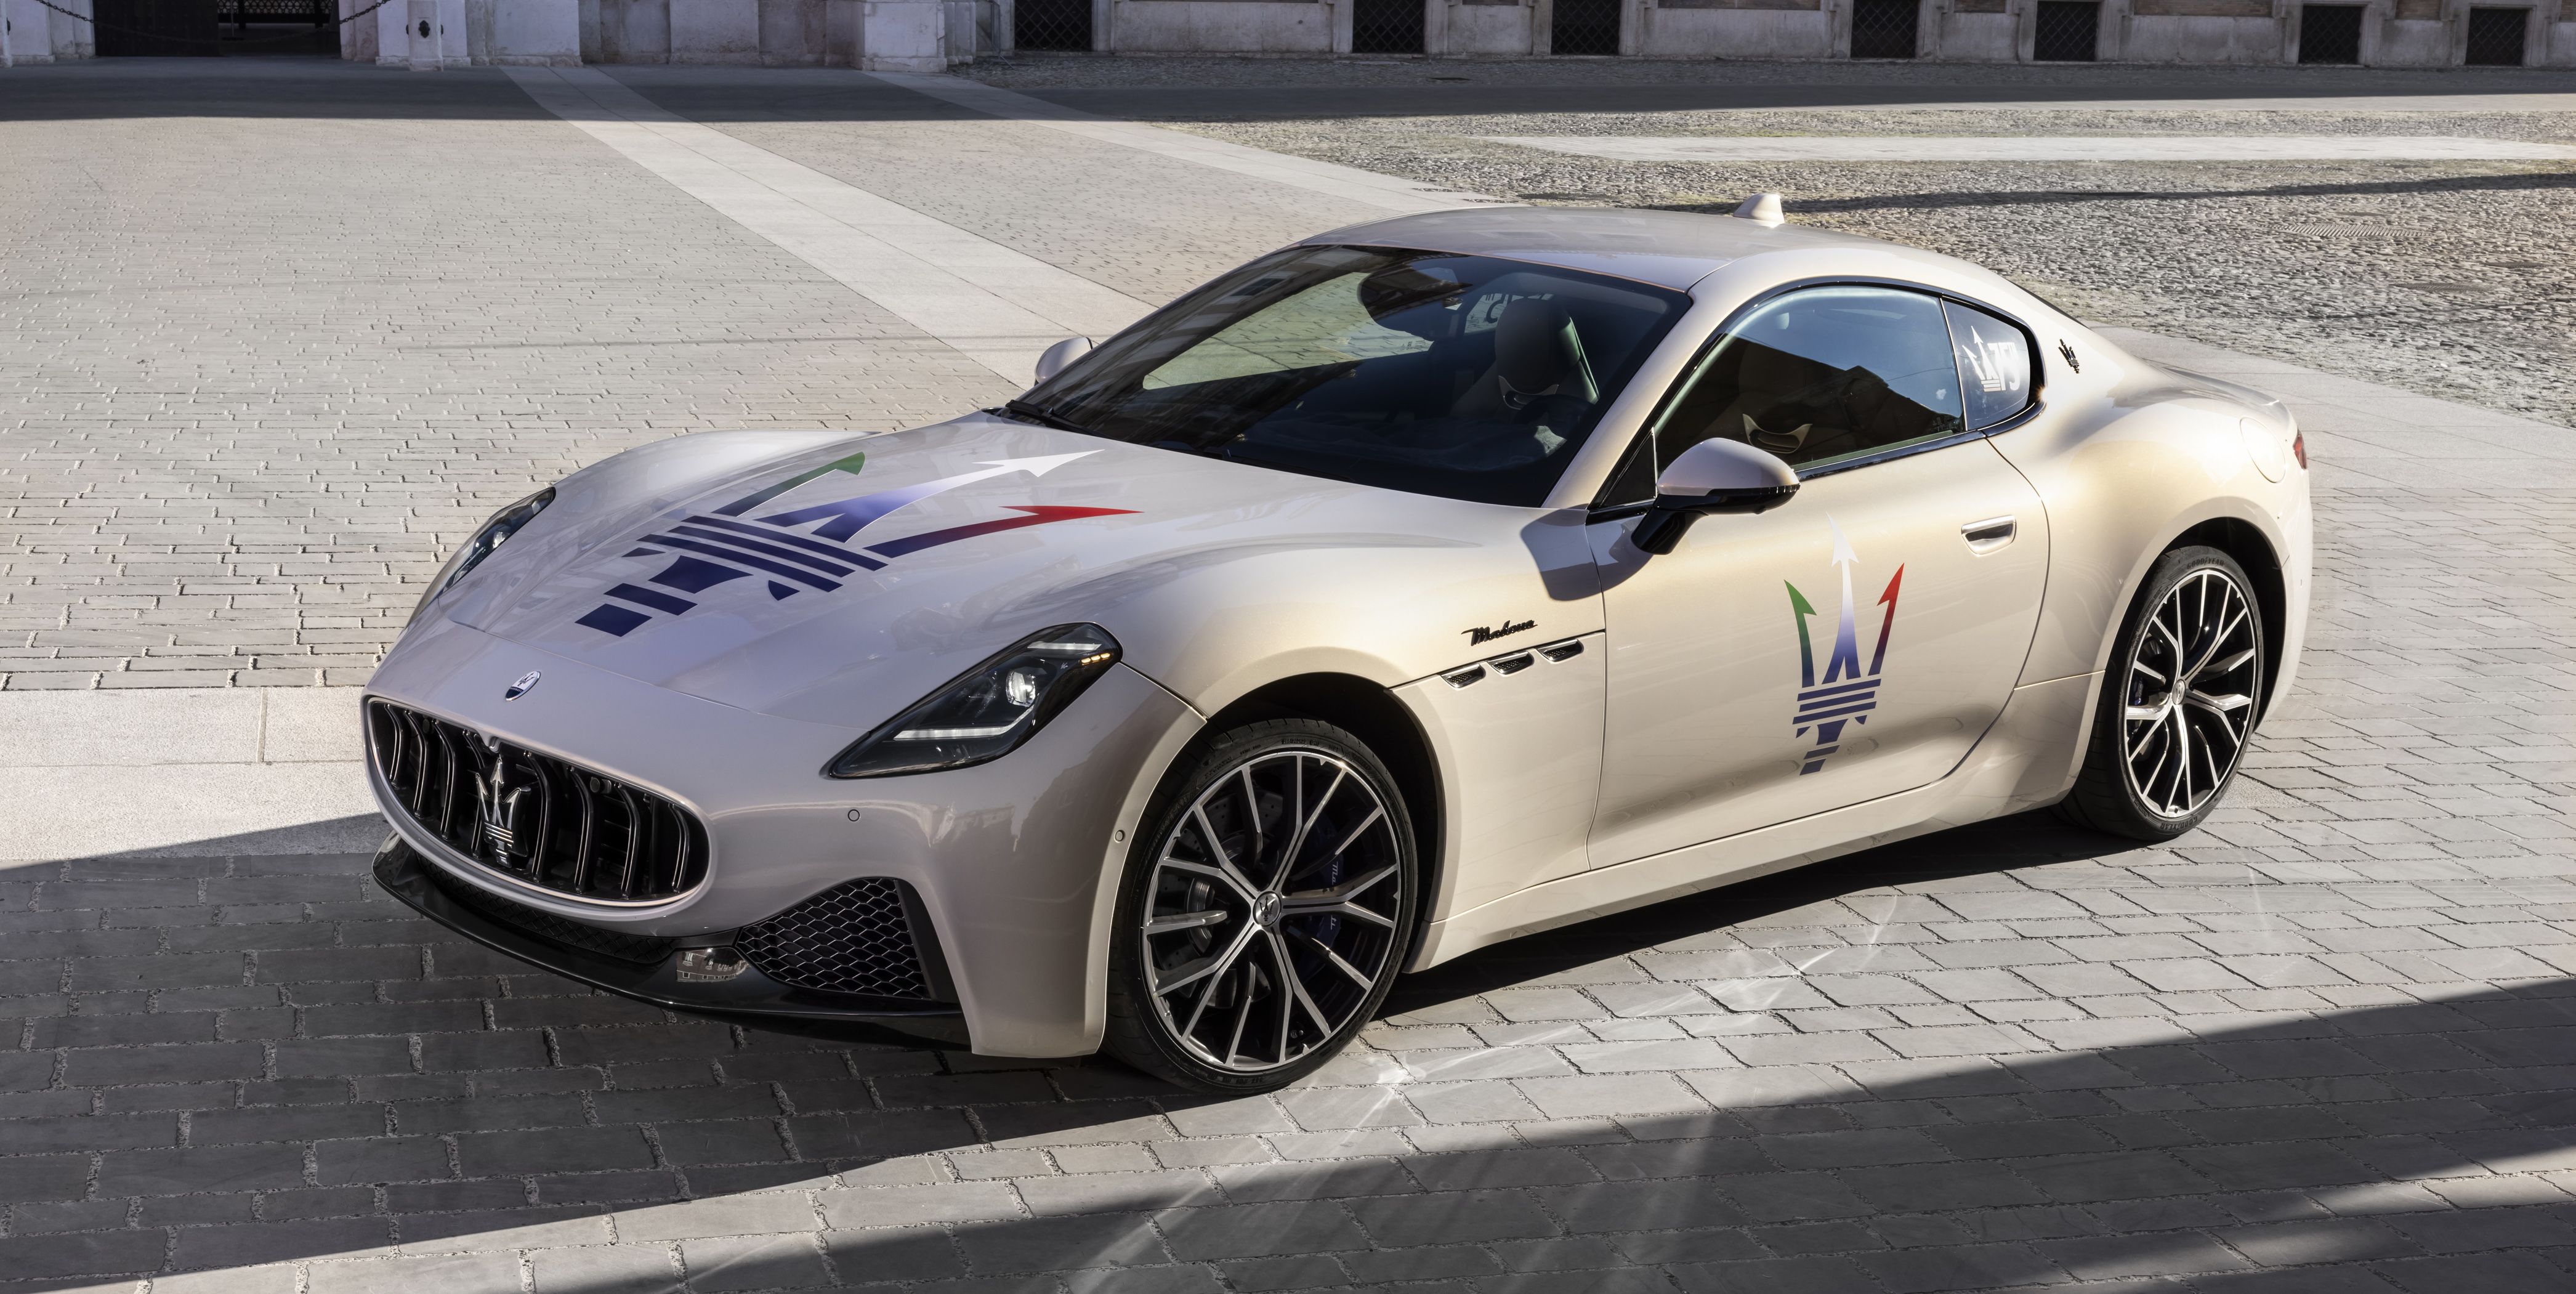 The New GranTurismo Is Getting the Twin-Turbo V-6 From the MC20